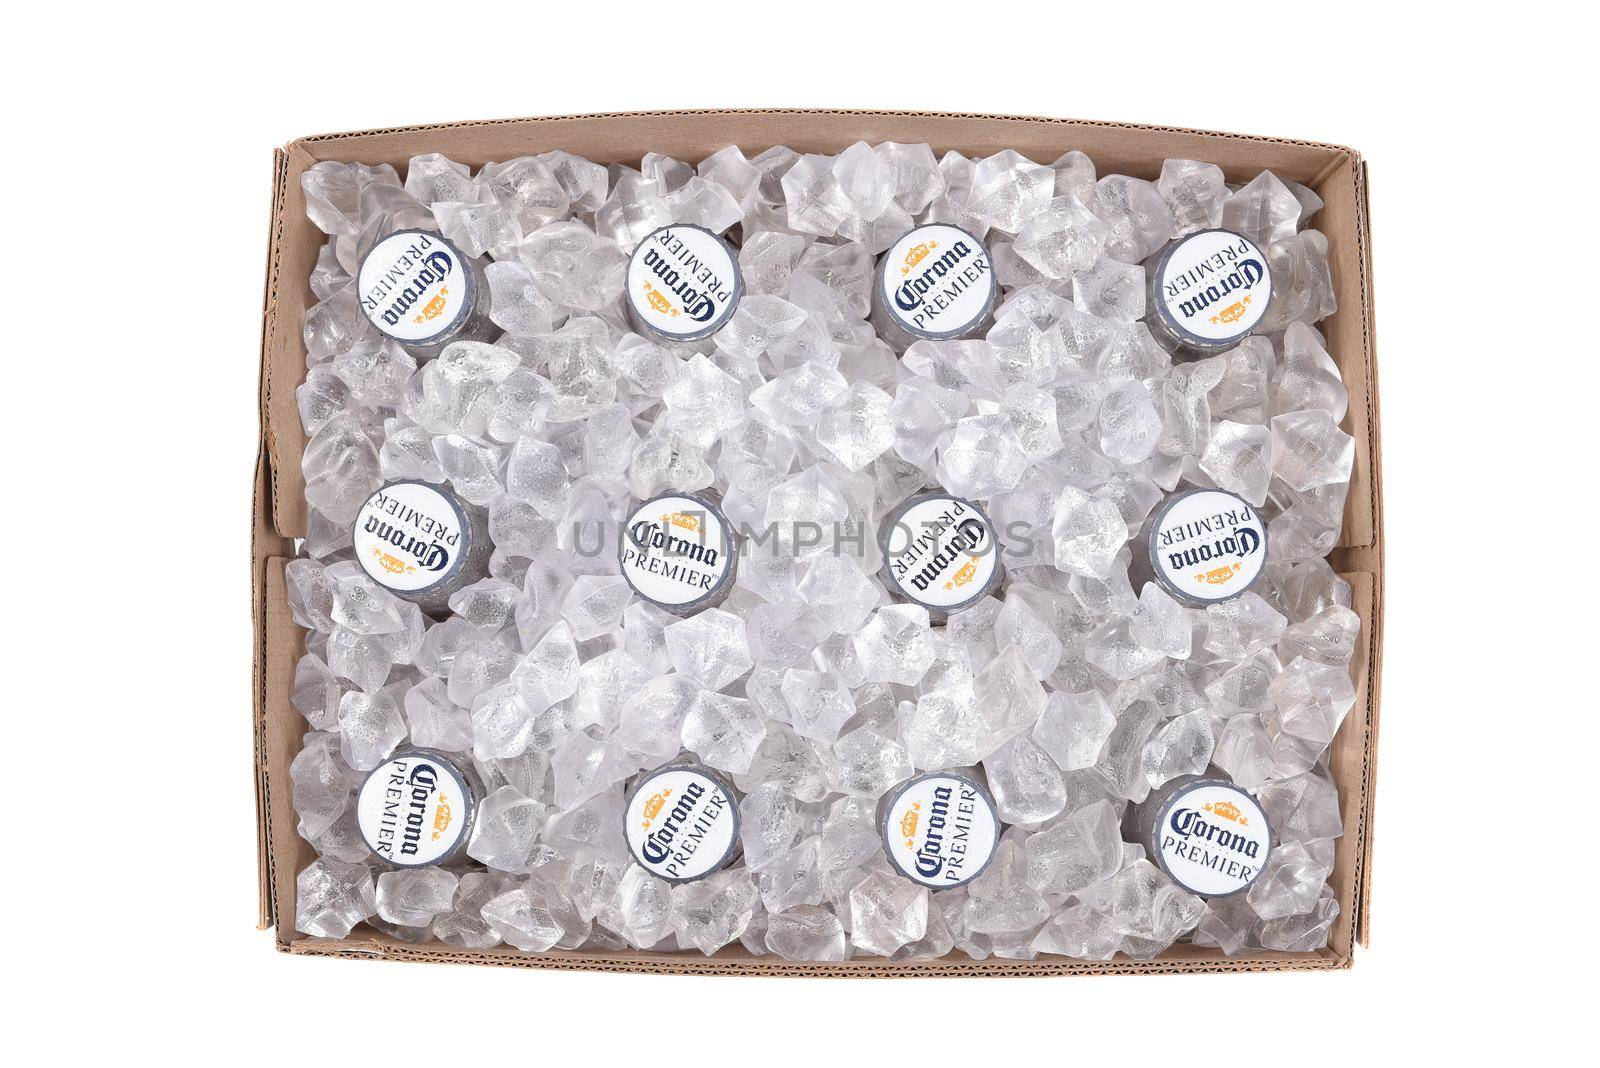 IRVINE, CALIFORNIA - 10 MAR 2020: High angle view of a 12 pack of Corona Premier bottles with ice cubs in the box.